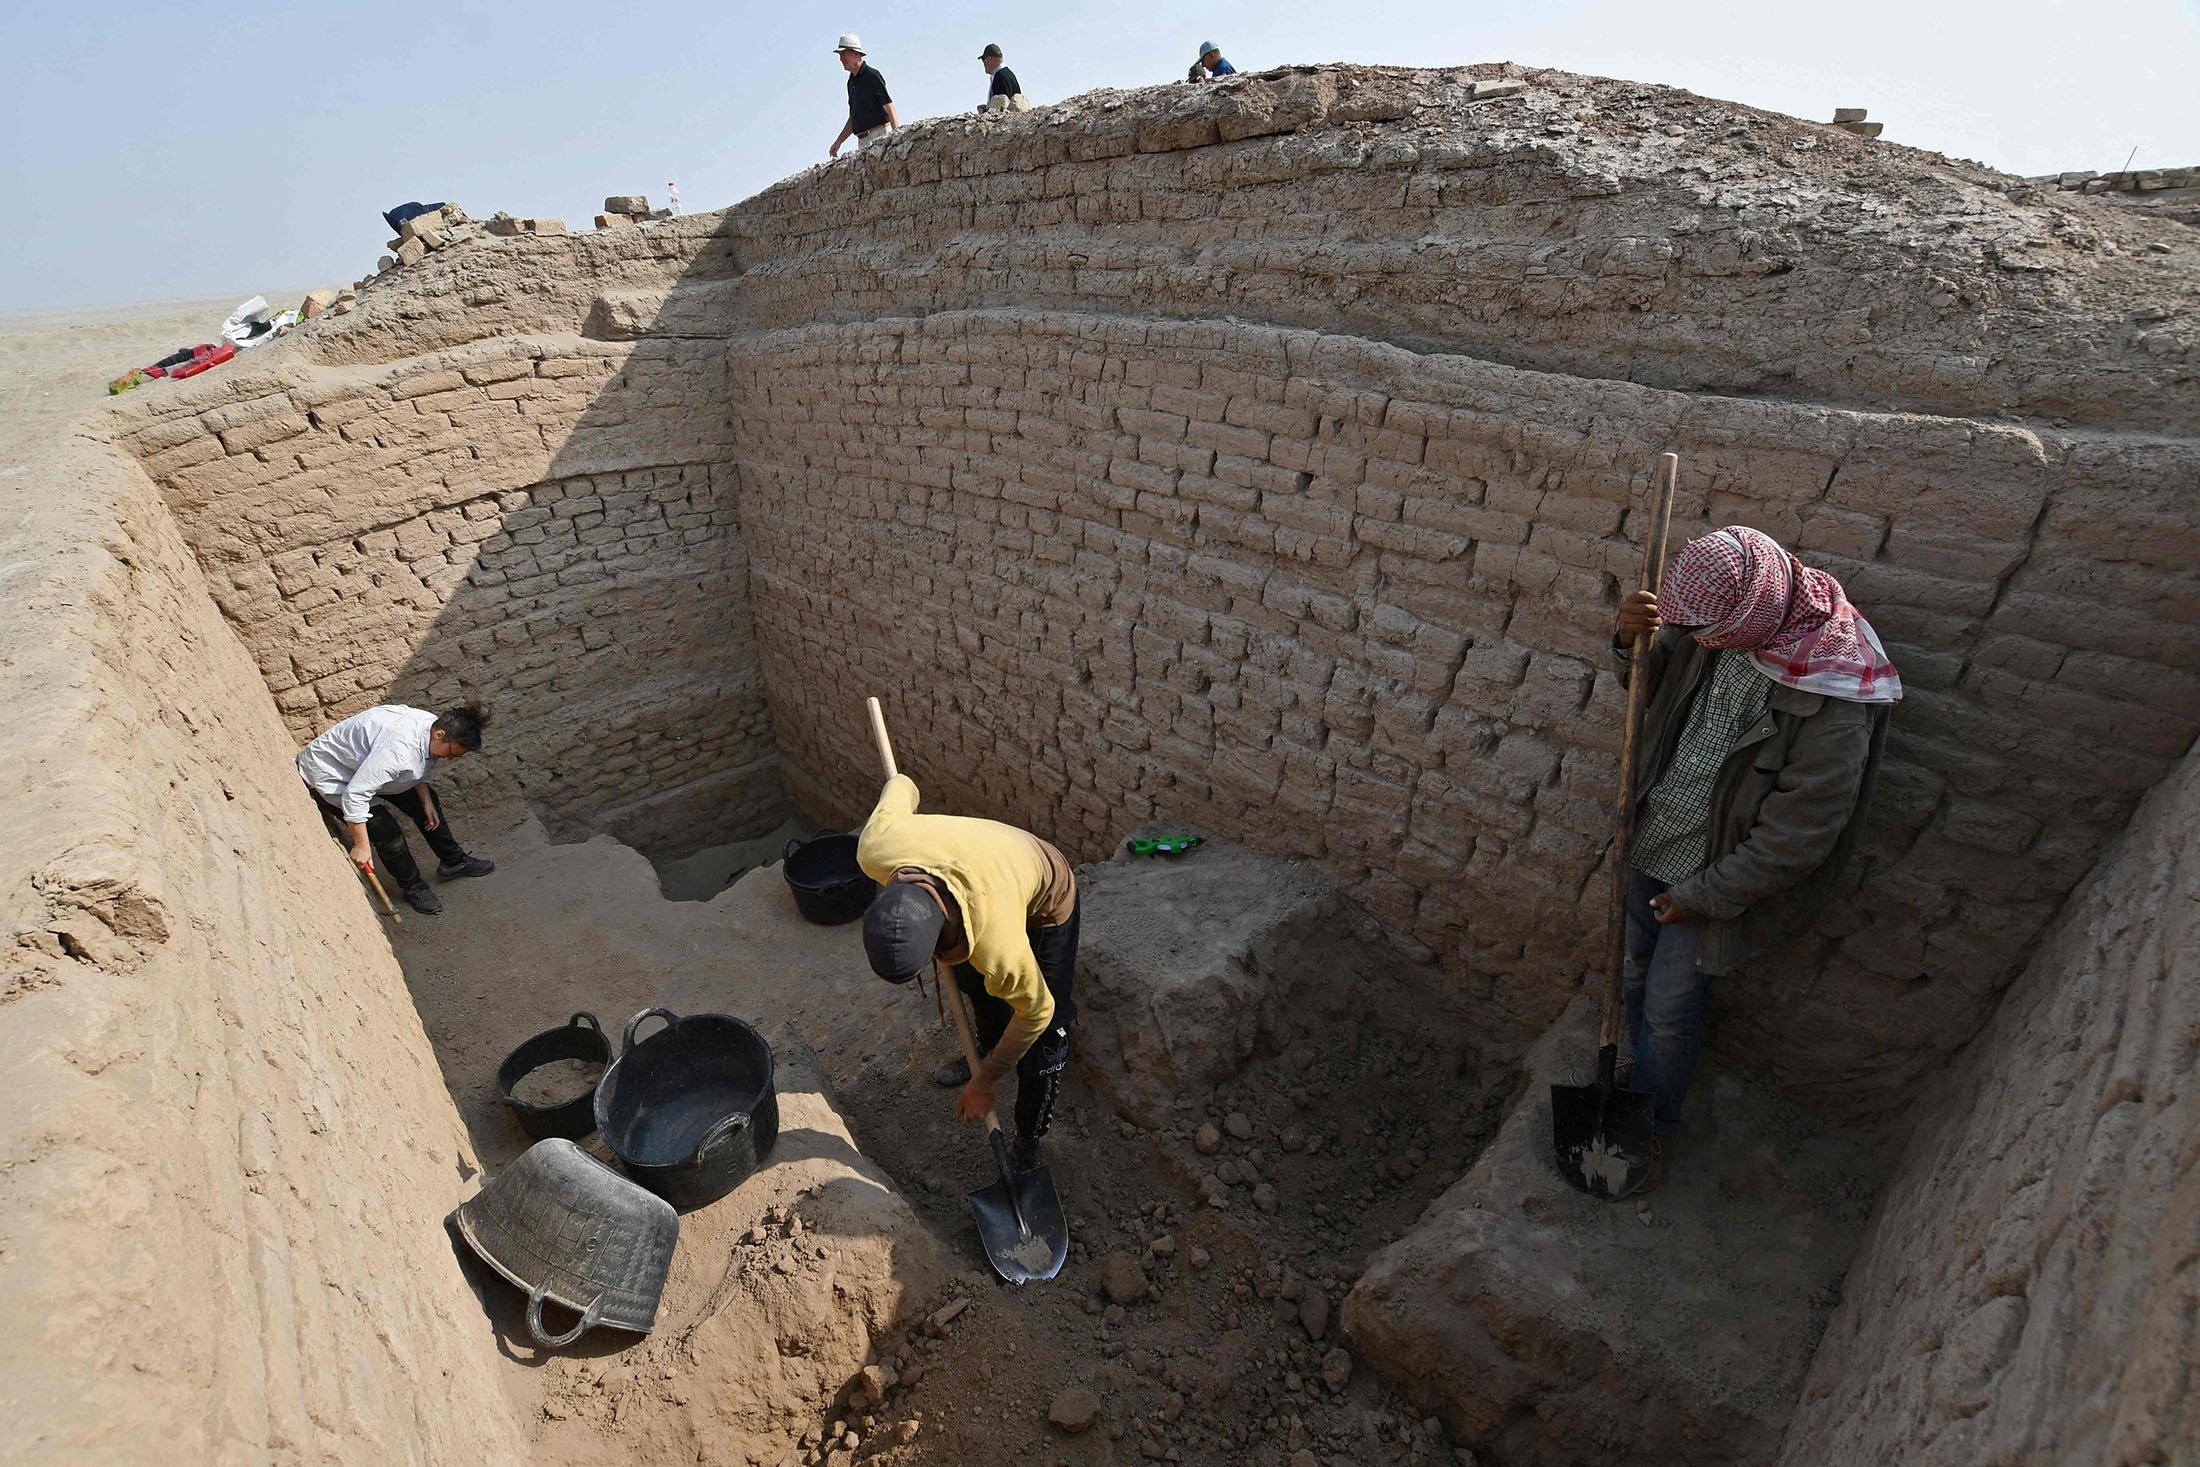 Members of a French-Iraqi archaeological expedition excavate at the site of the Sumerian city-state of Larsa, in the Qatiaah area of southern province of Dhi Qar near the city of Nasiriyah, Iraq, Nov. 22, 2021. (AFP Photo)